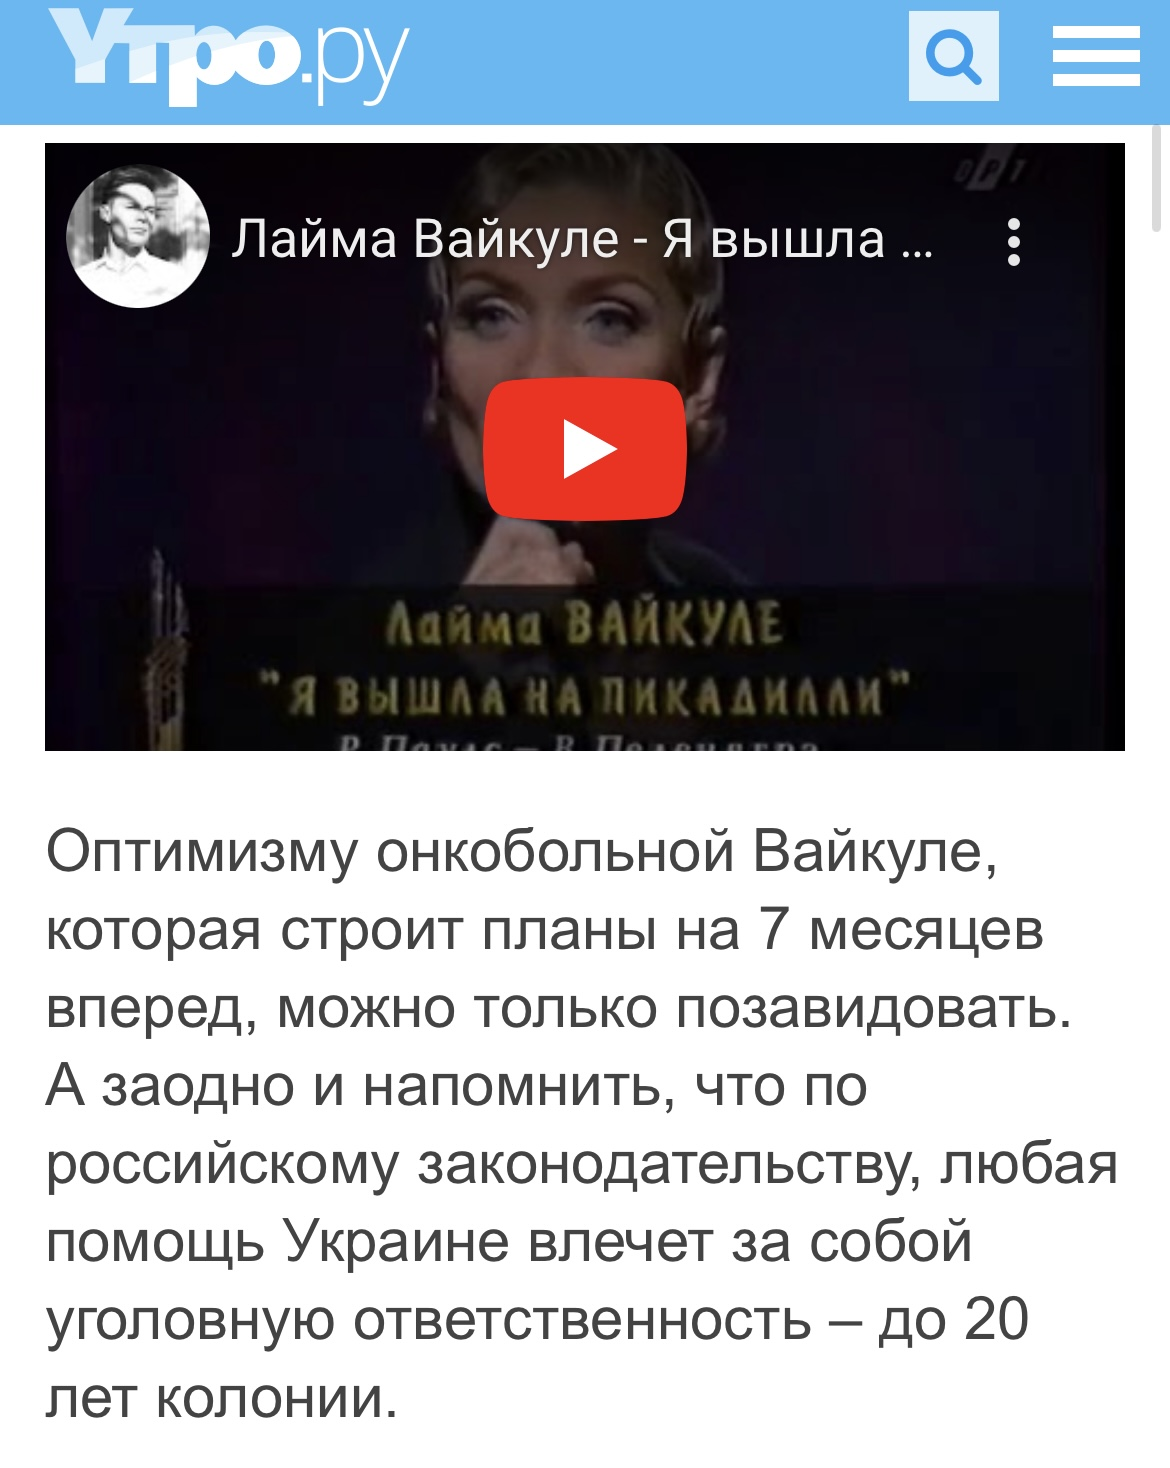 Russian media got angry with Laima Vaikule for supporting the Ukrainian Armed Forces and threatened her with 20 years in prison